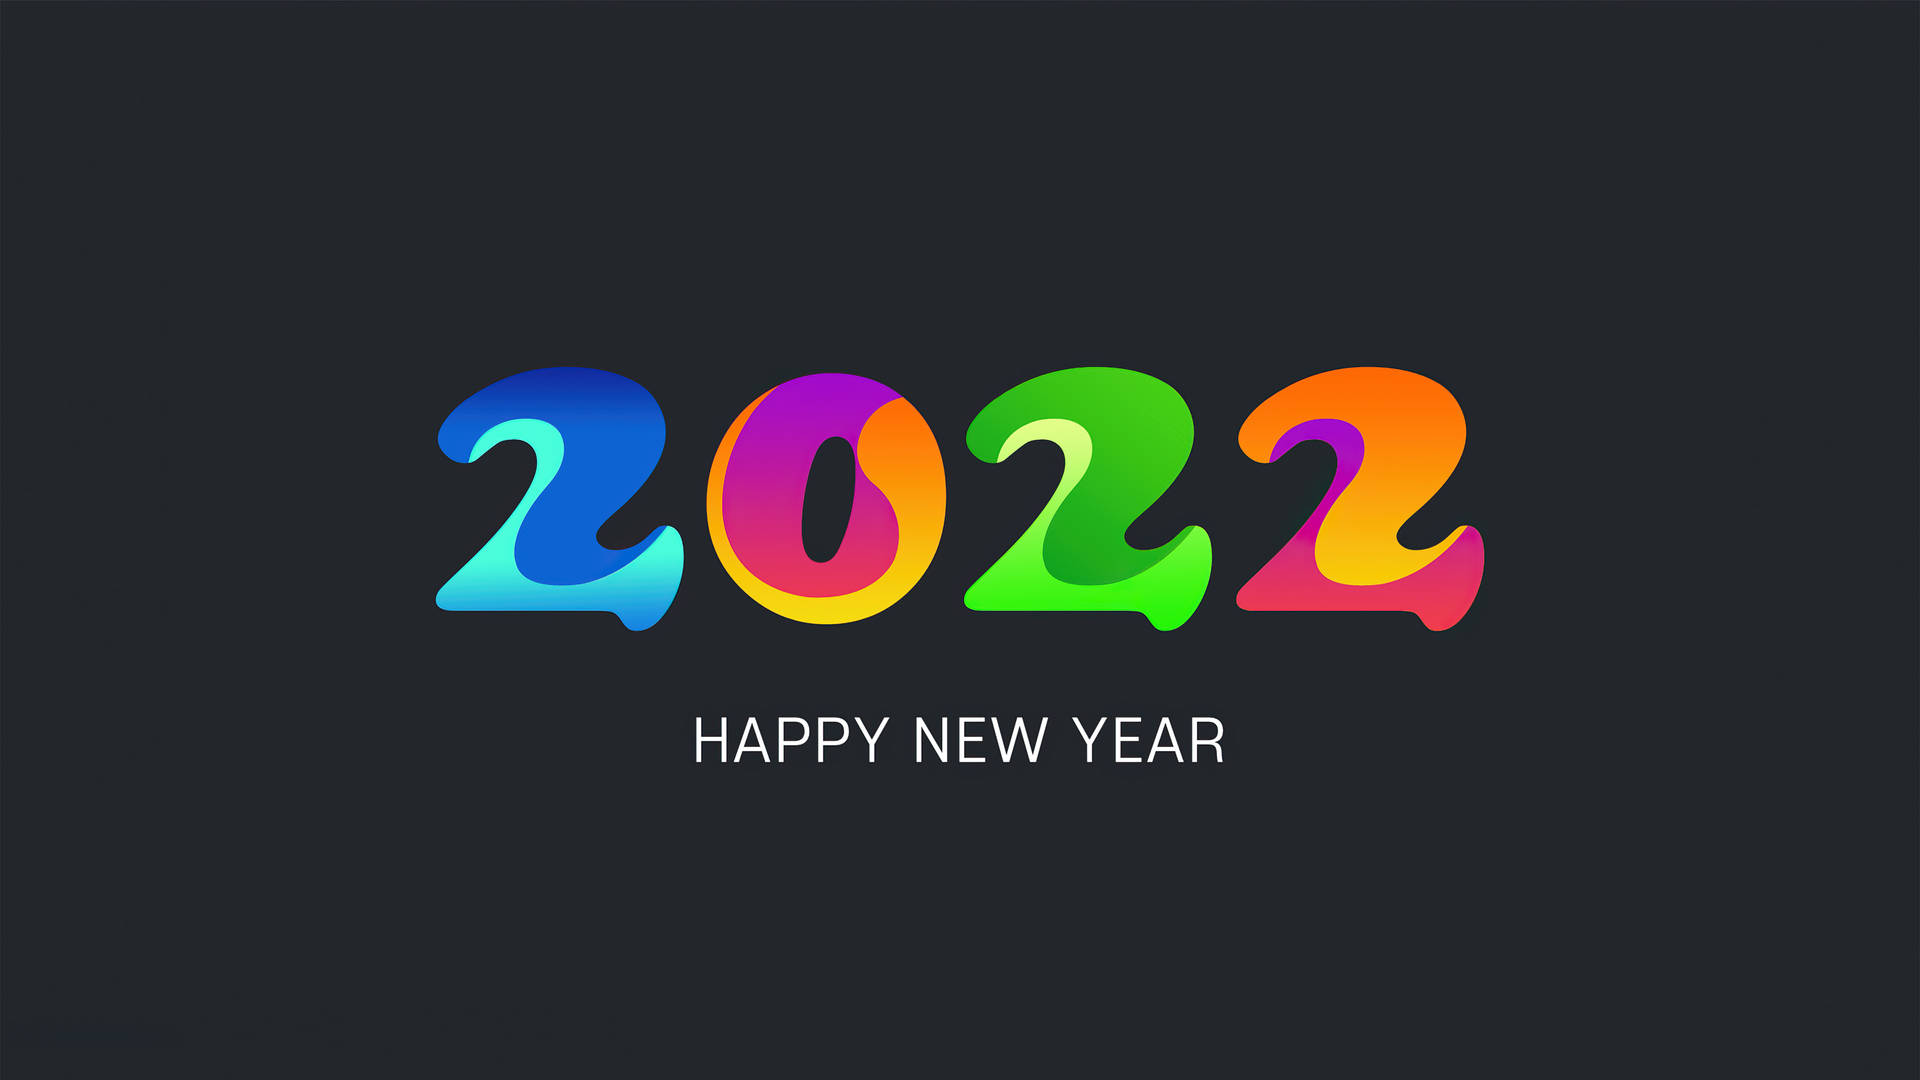 Happy New Year 2022 Colorful Neon Art Background